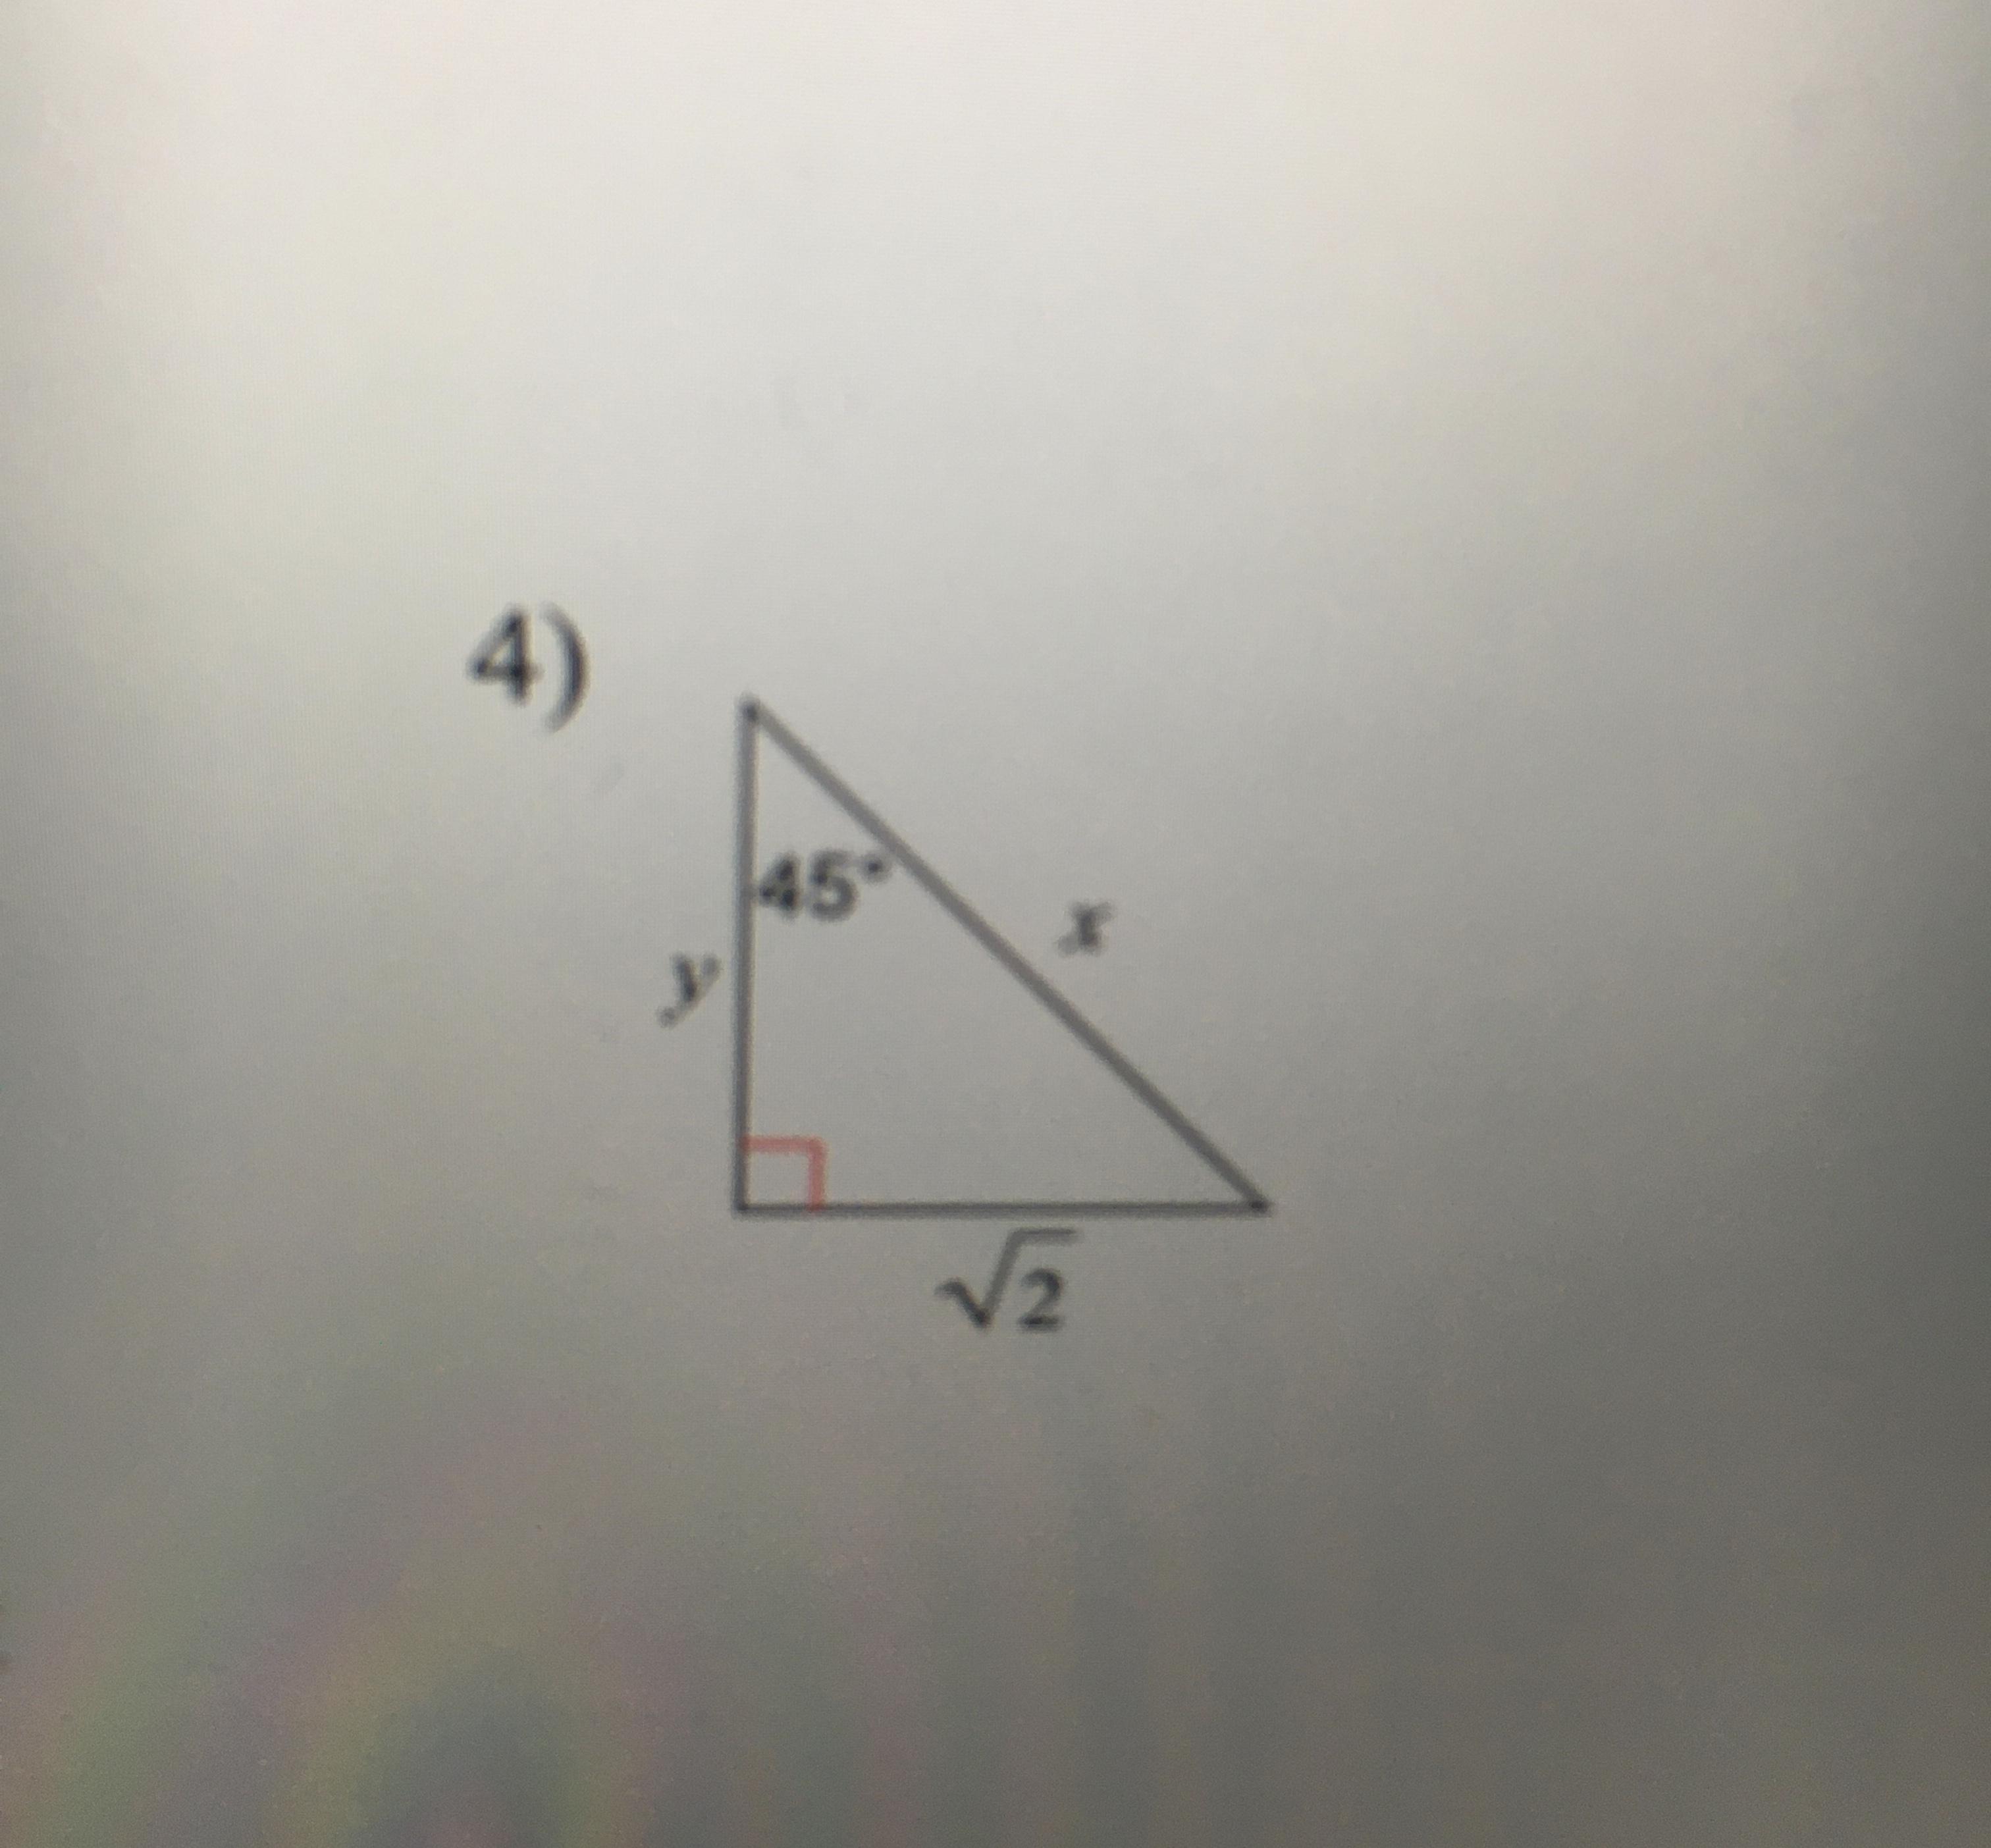 Find The Missing Side Length.Please I Need Help, Also Need Explanation.Thank You!!